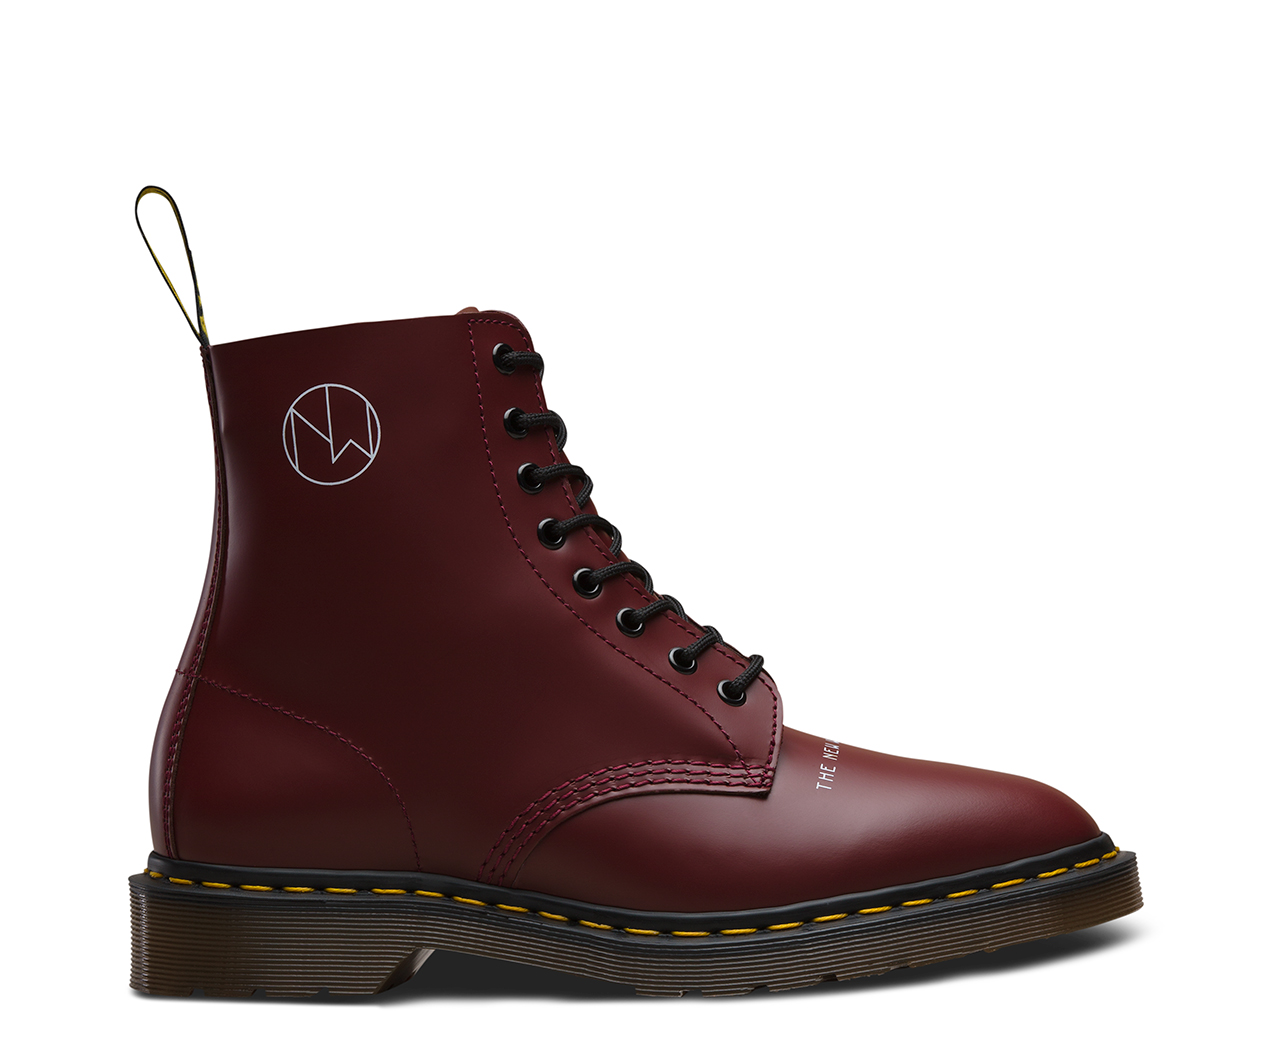 Dr. Martens 1460 8-Eye Undercover Cherry Red